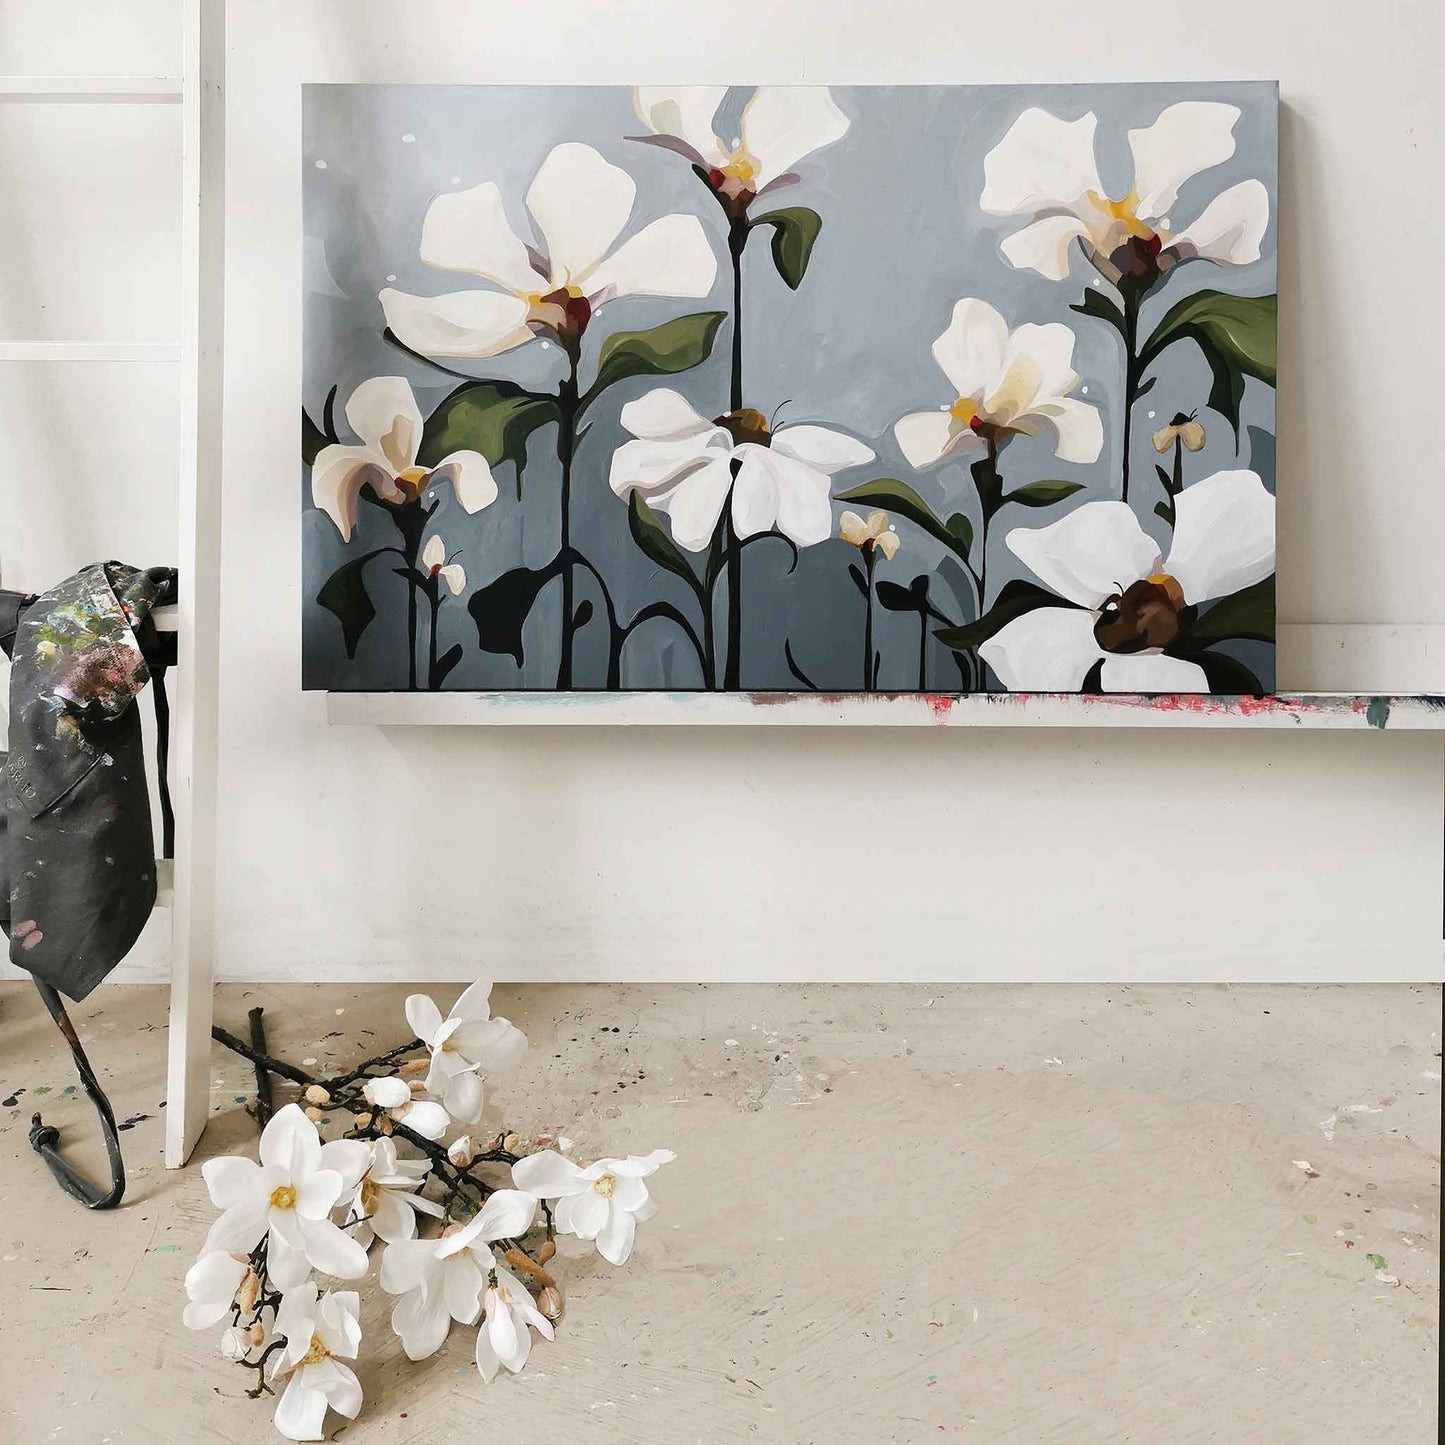 Large original acrylic flower painting on canvas in artist's studio